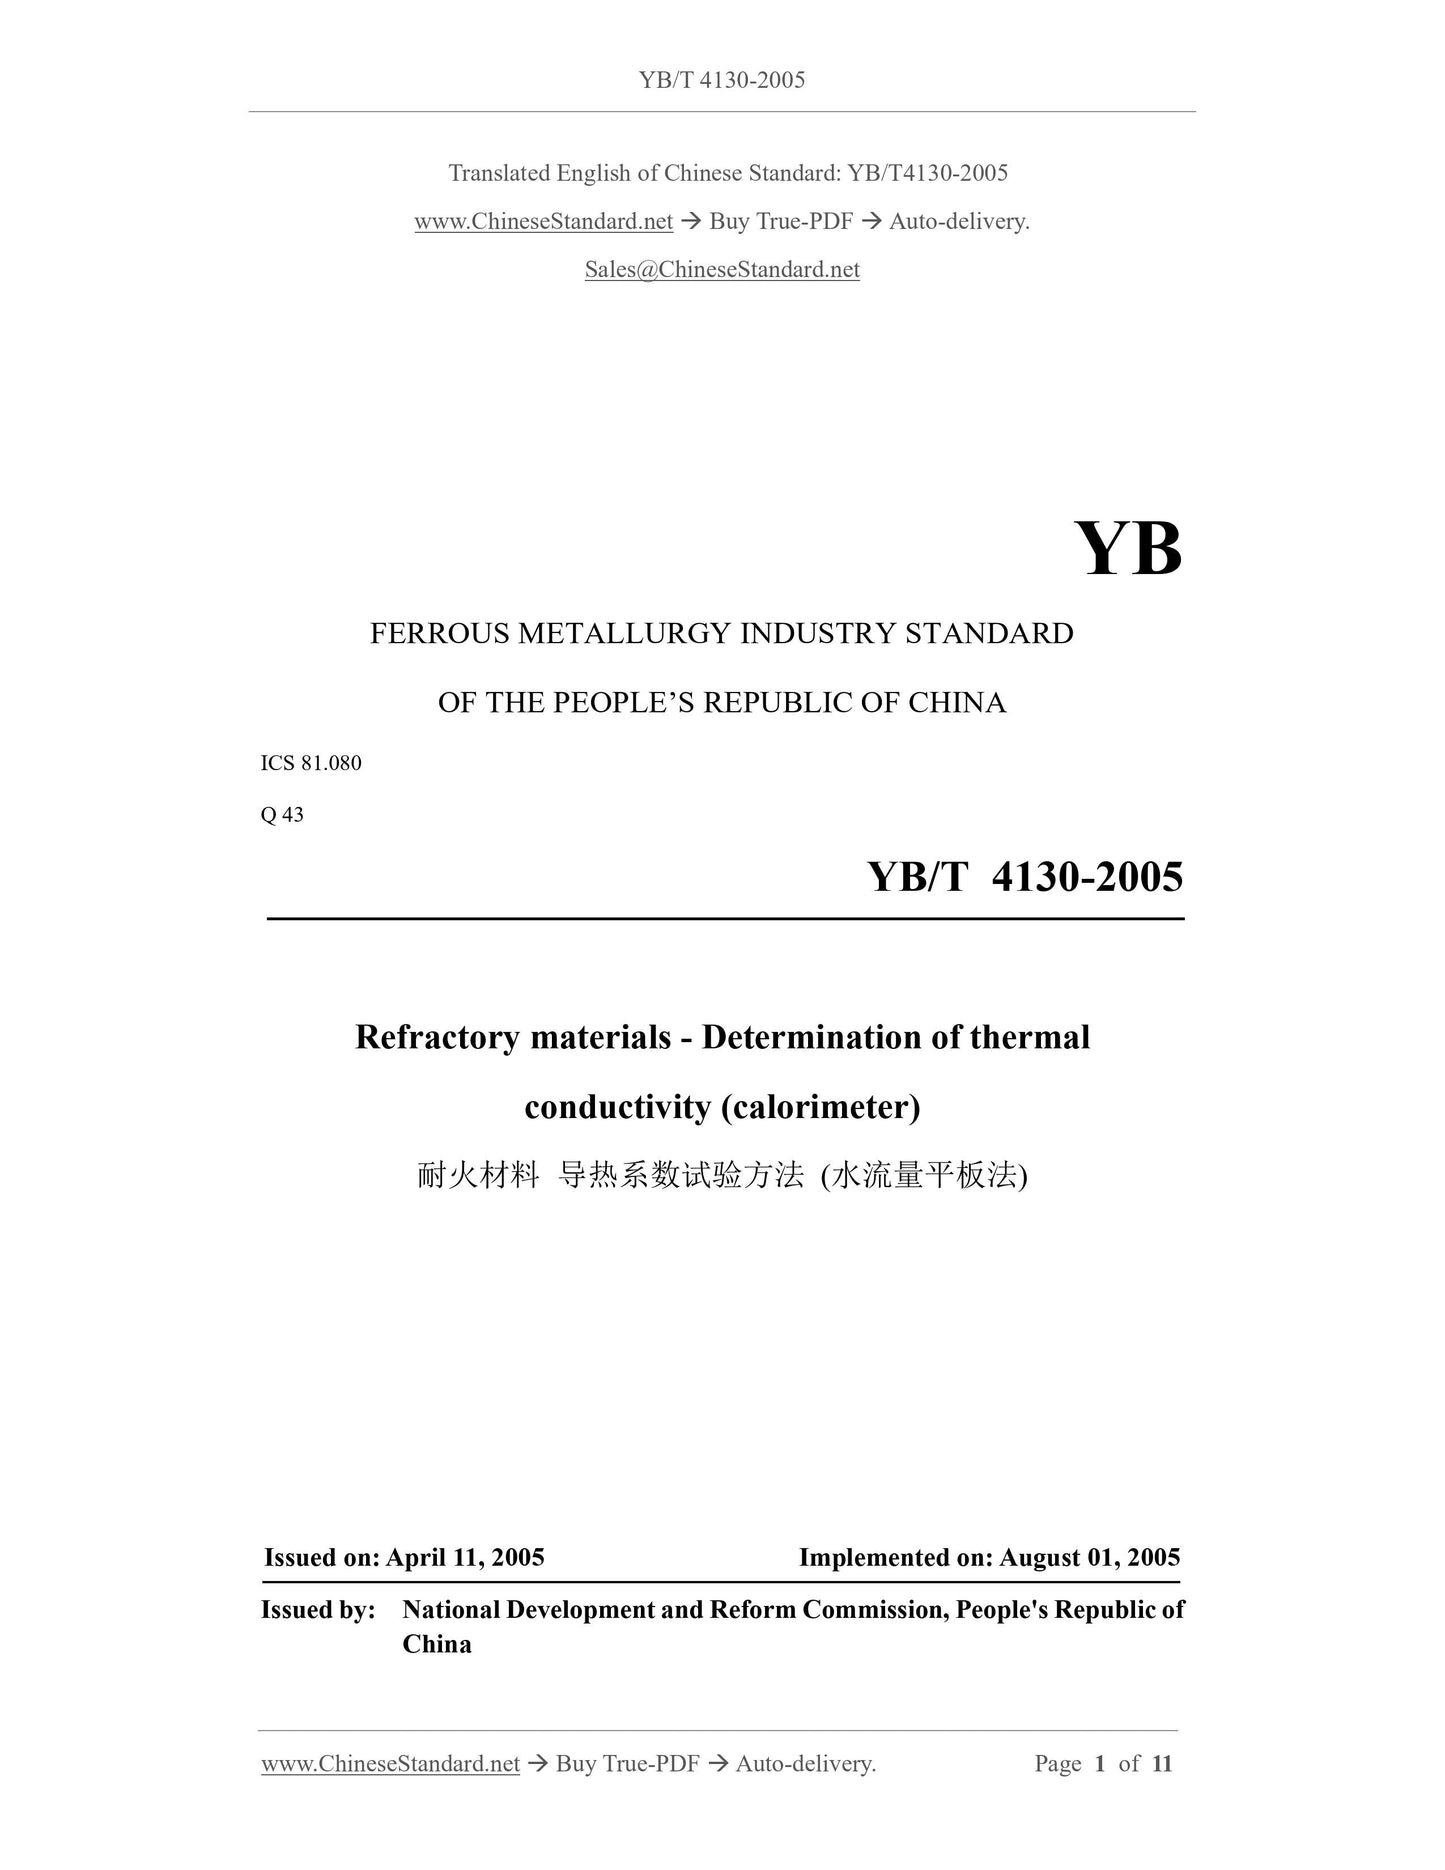 YB/T 4130-2005 Page 1